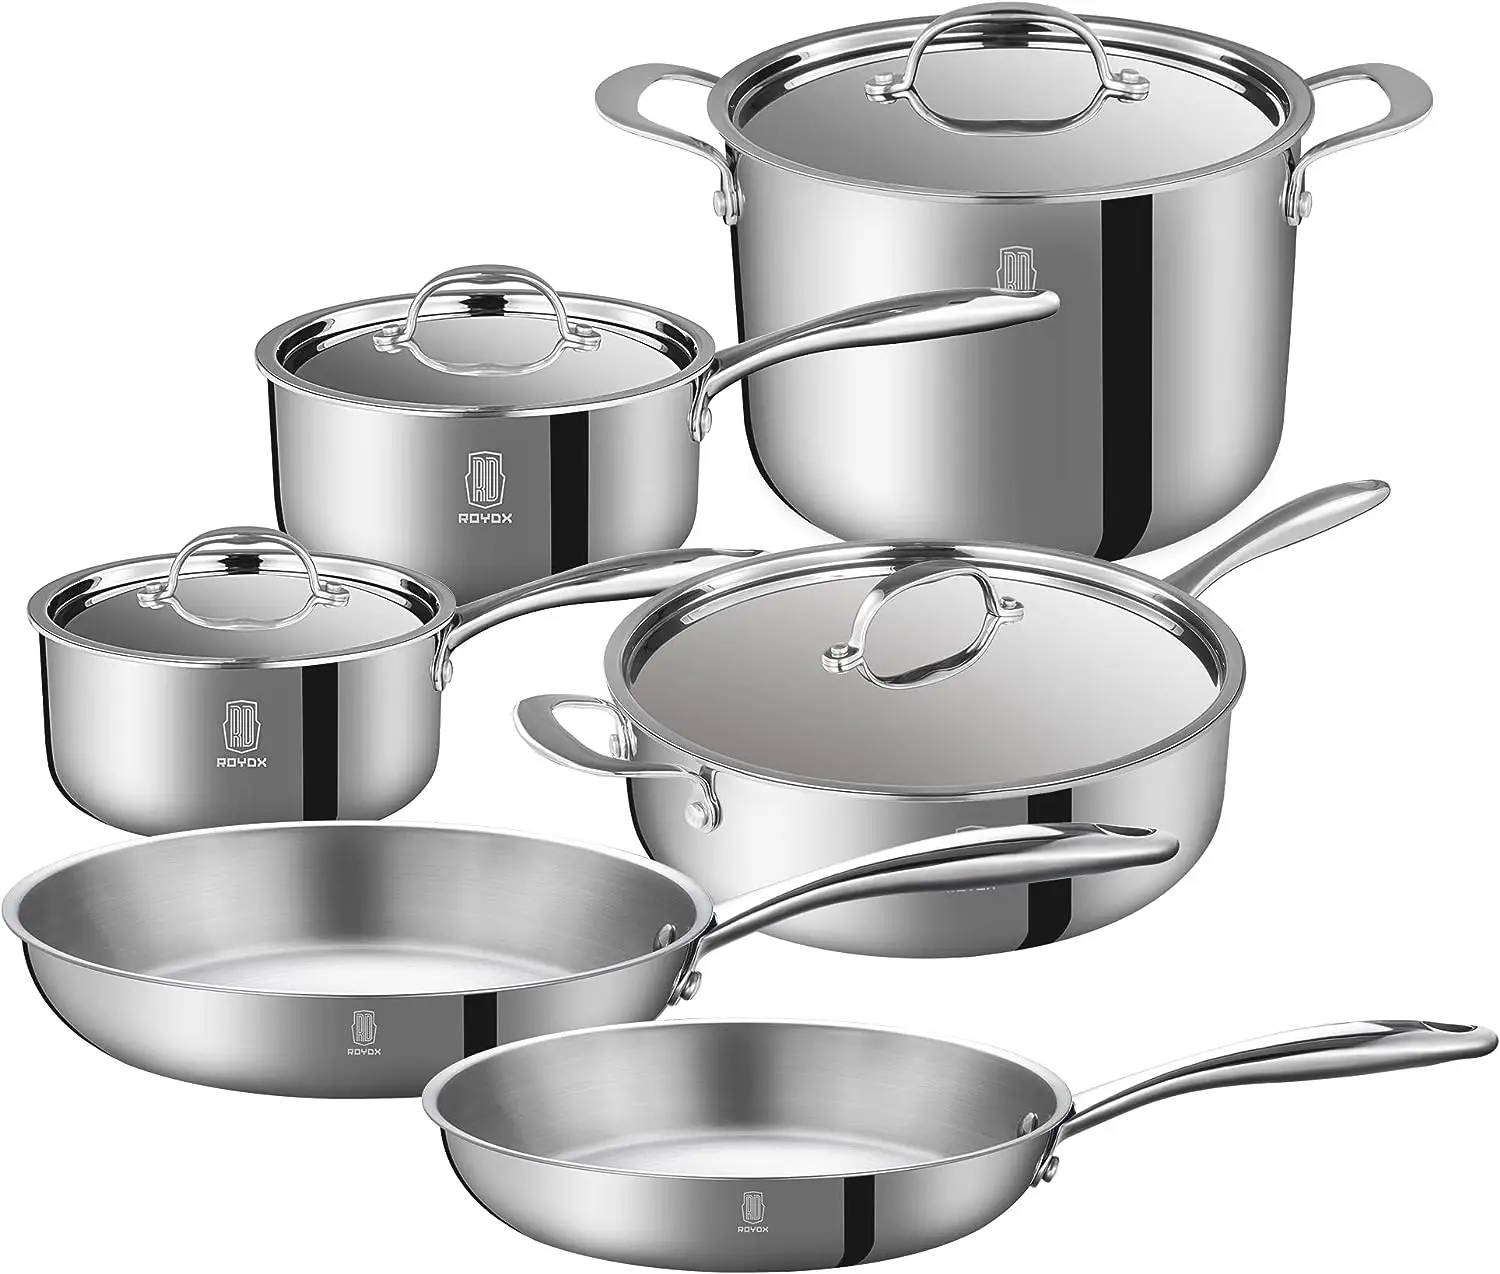 https://ae01.alicdn.com/kf/S117f0d5187bf430f8c7837fc70169a9f5/10-Piece-Pots-and-Pans-Set-Stainless-Steel-Pan-Kitchen-Cookware-Stay-Cool-Handle-Includes-Frying.jpg